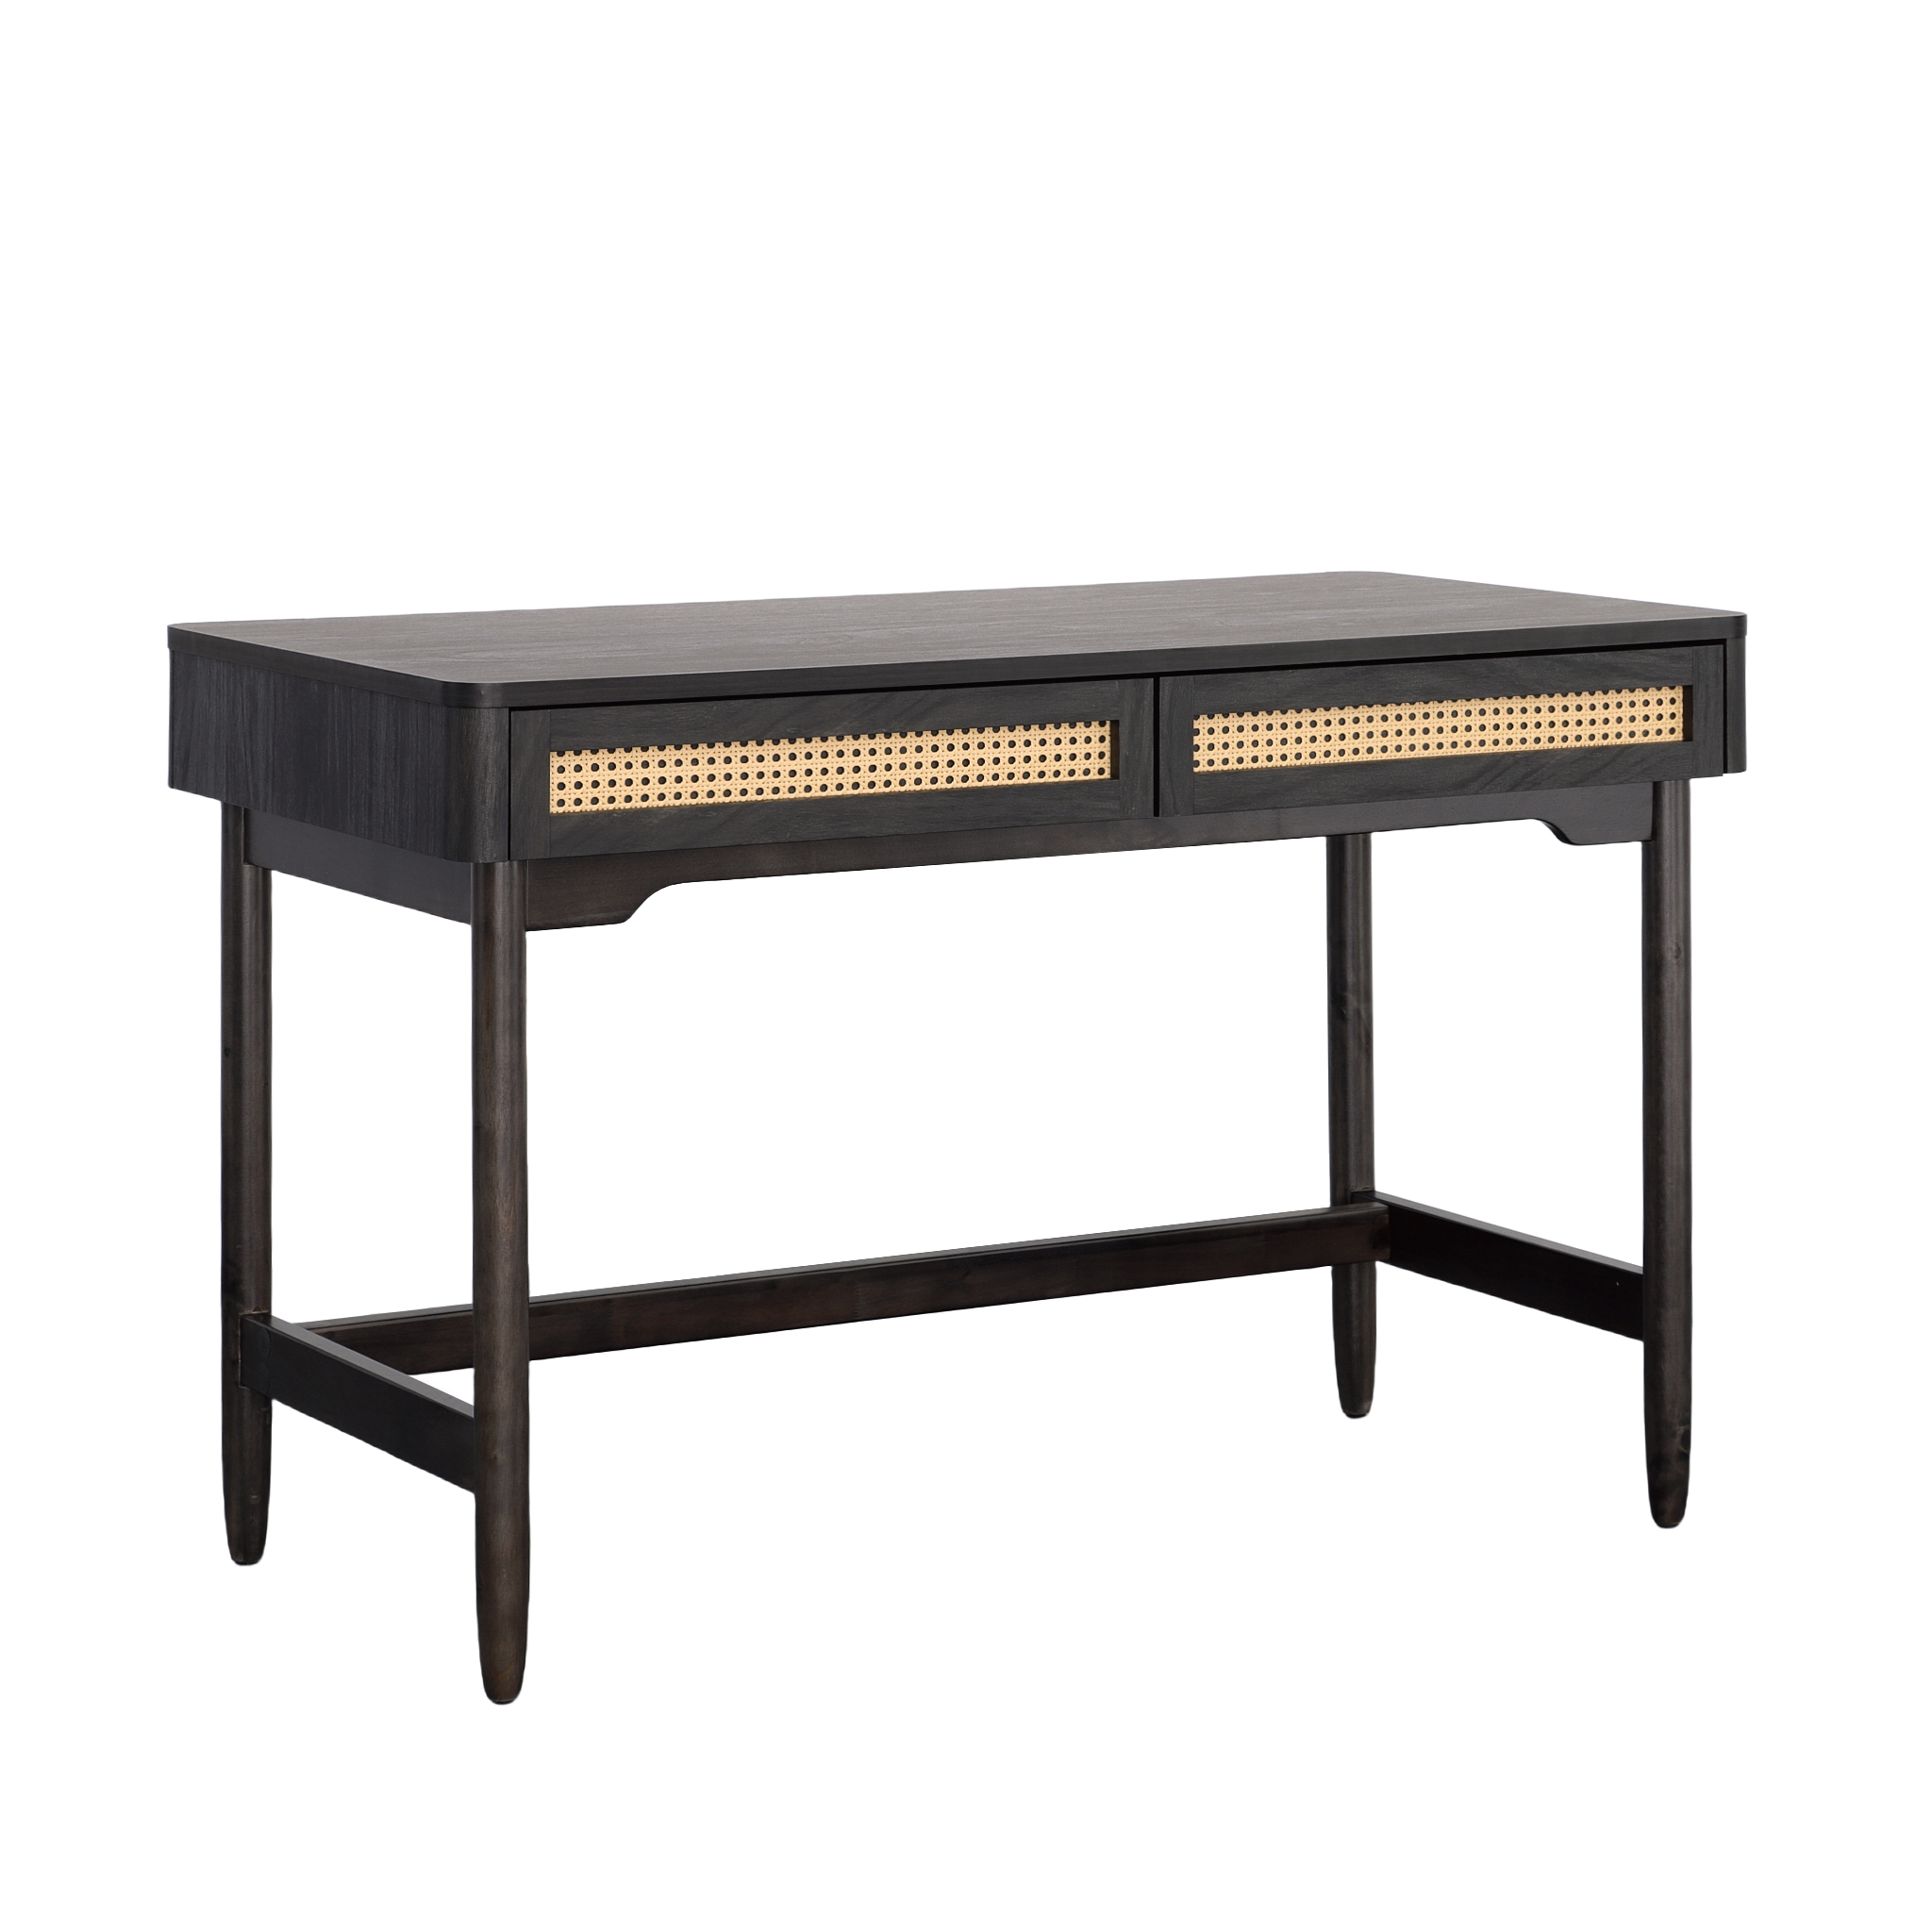 Better Homes & Gardens Springwood Caning Desk, Charcoal Finish - image 4 of 12